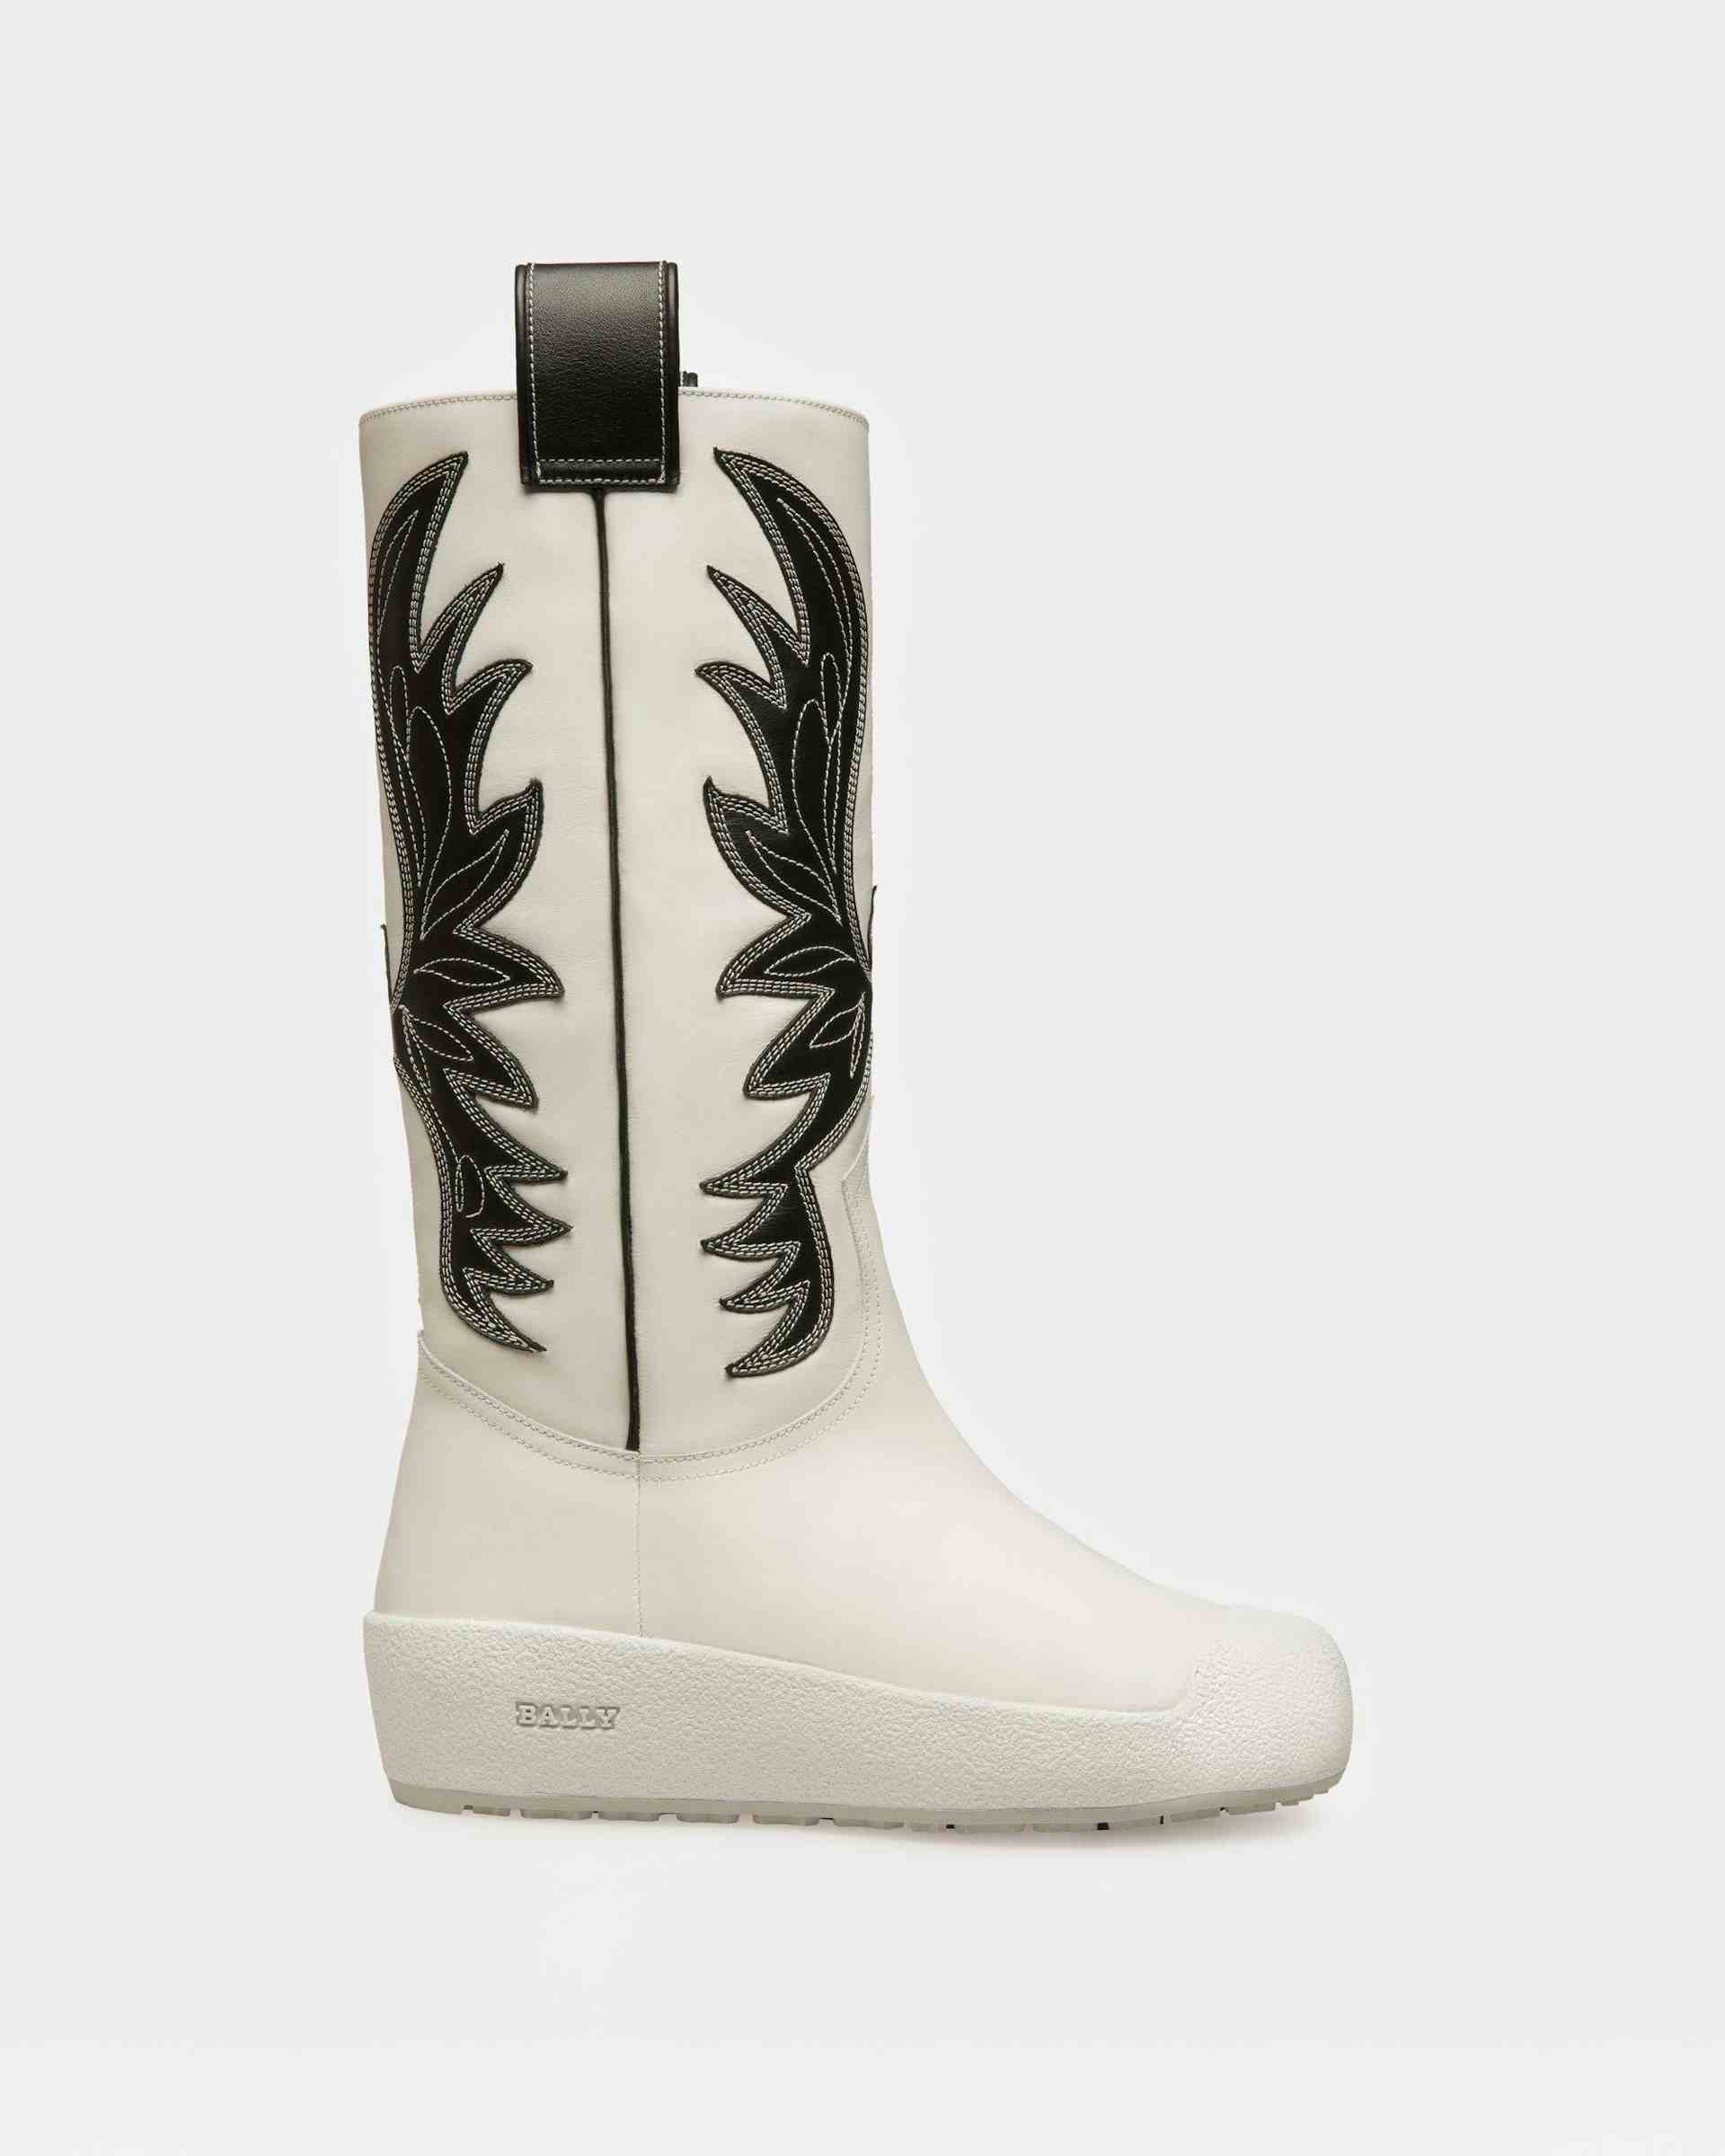 Chambery Leather Long Boots In White & Black - Women's - Bally